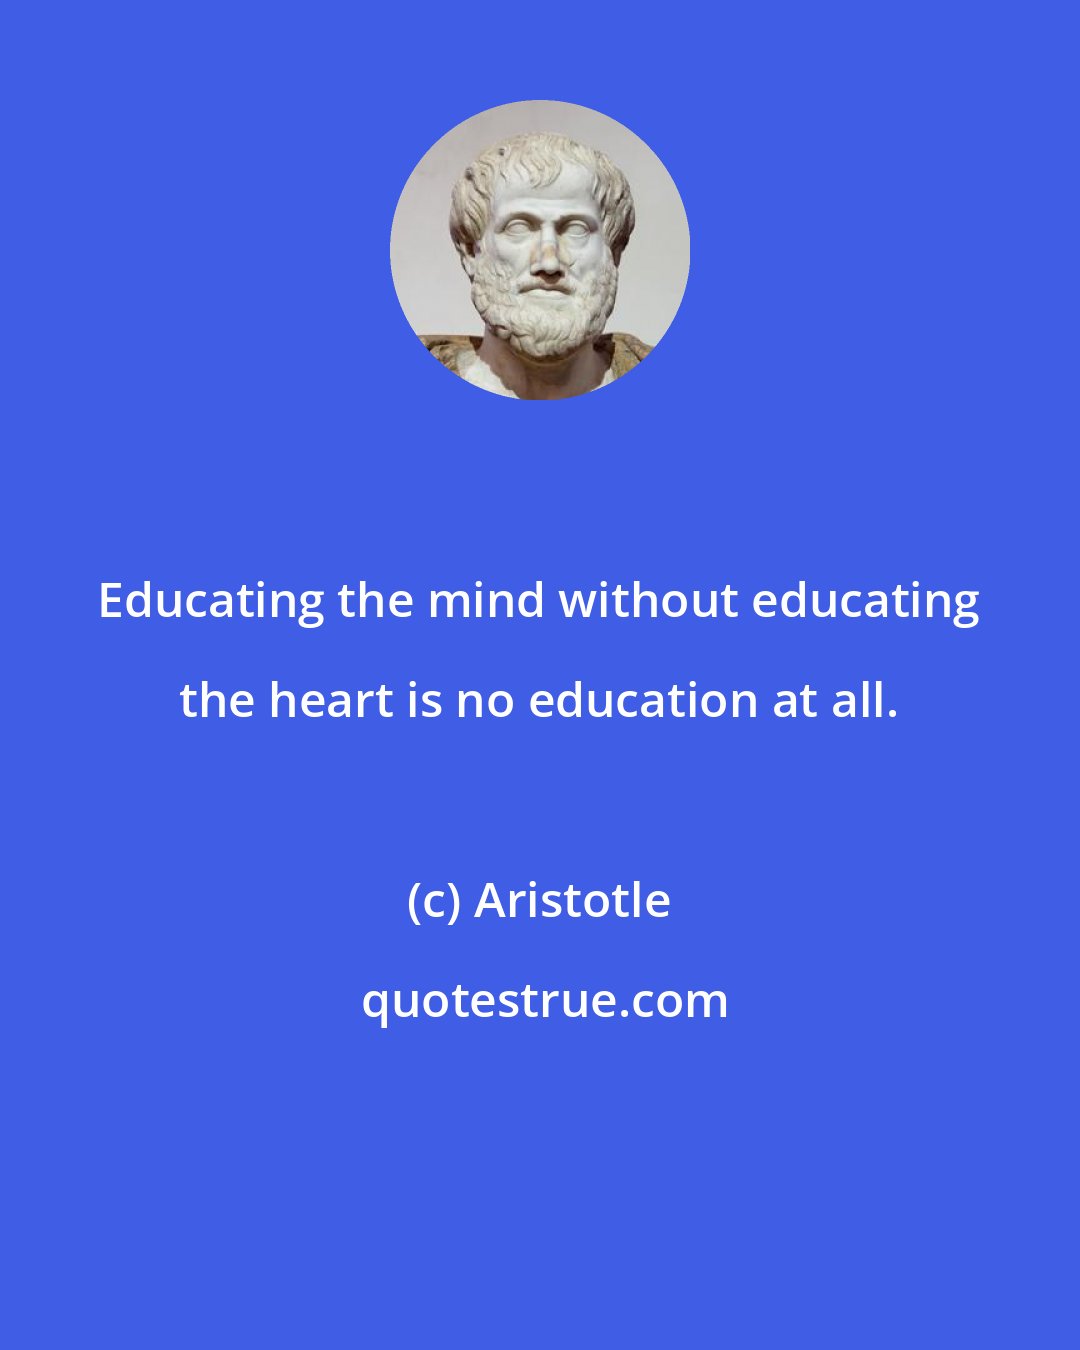 Aristotle: Educating the mind without educating the heart is no education at all.